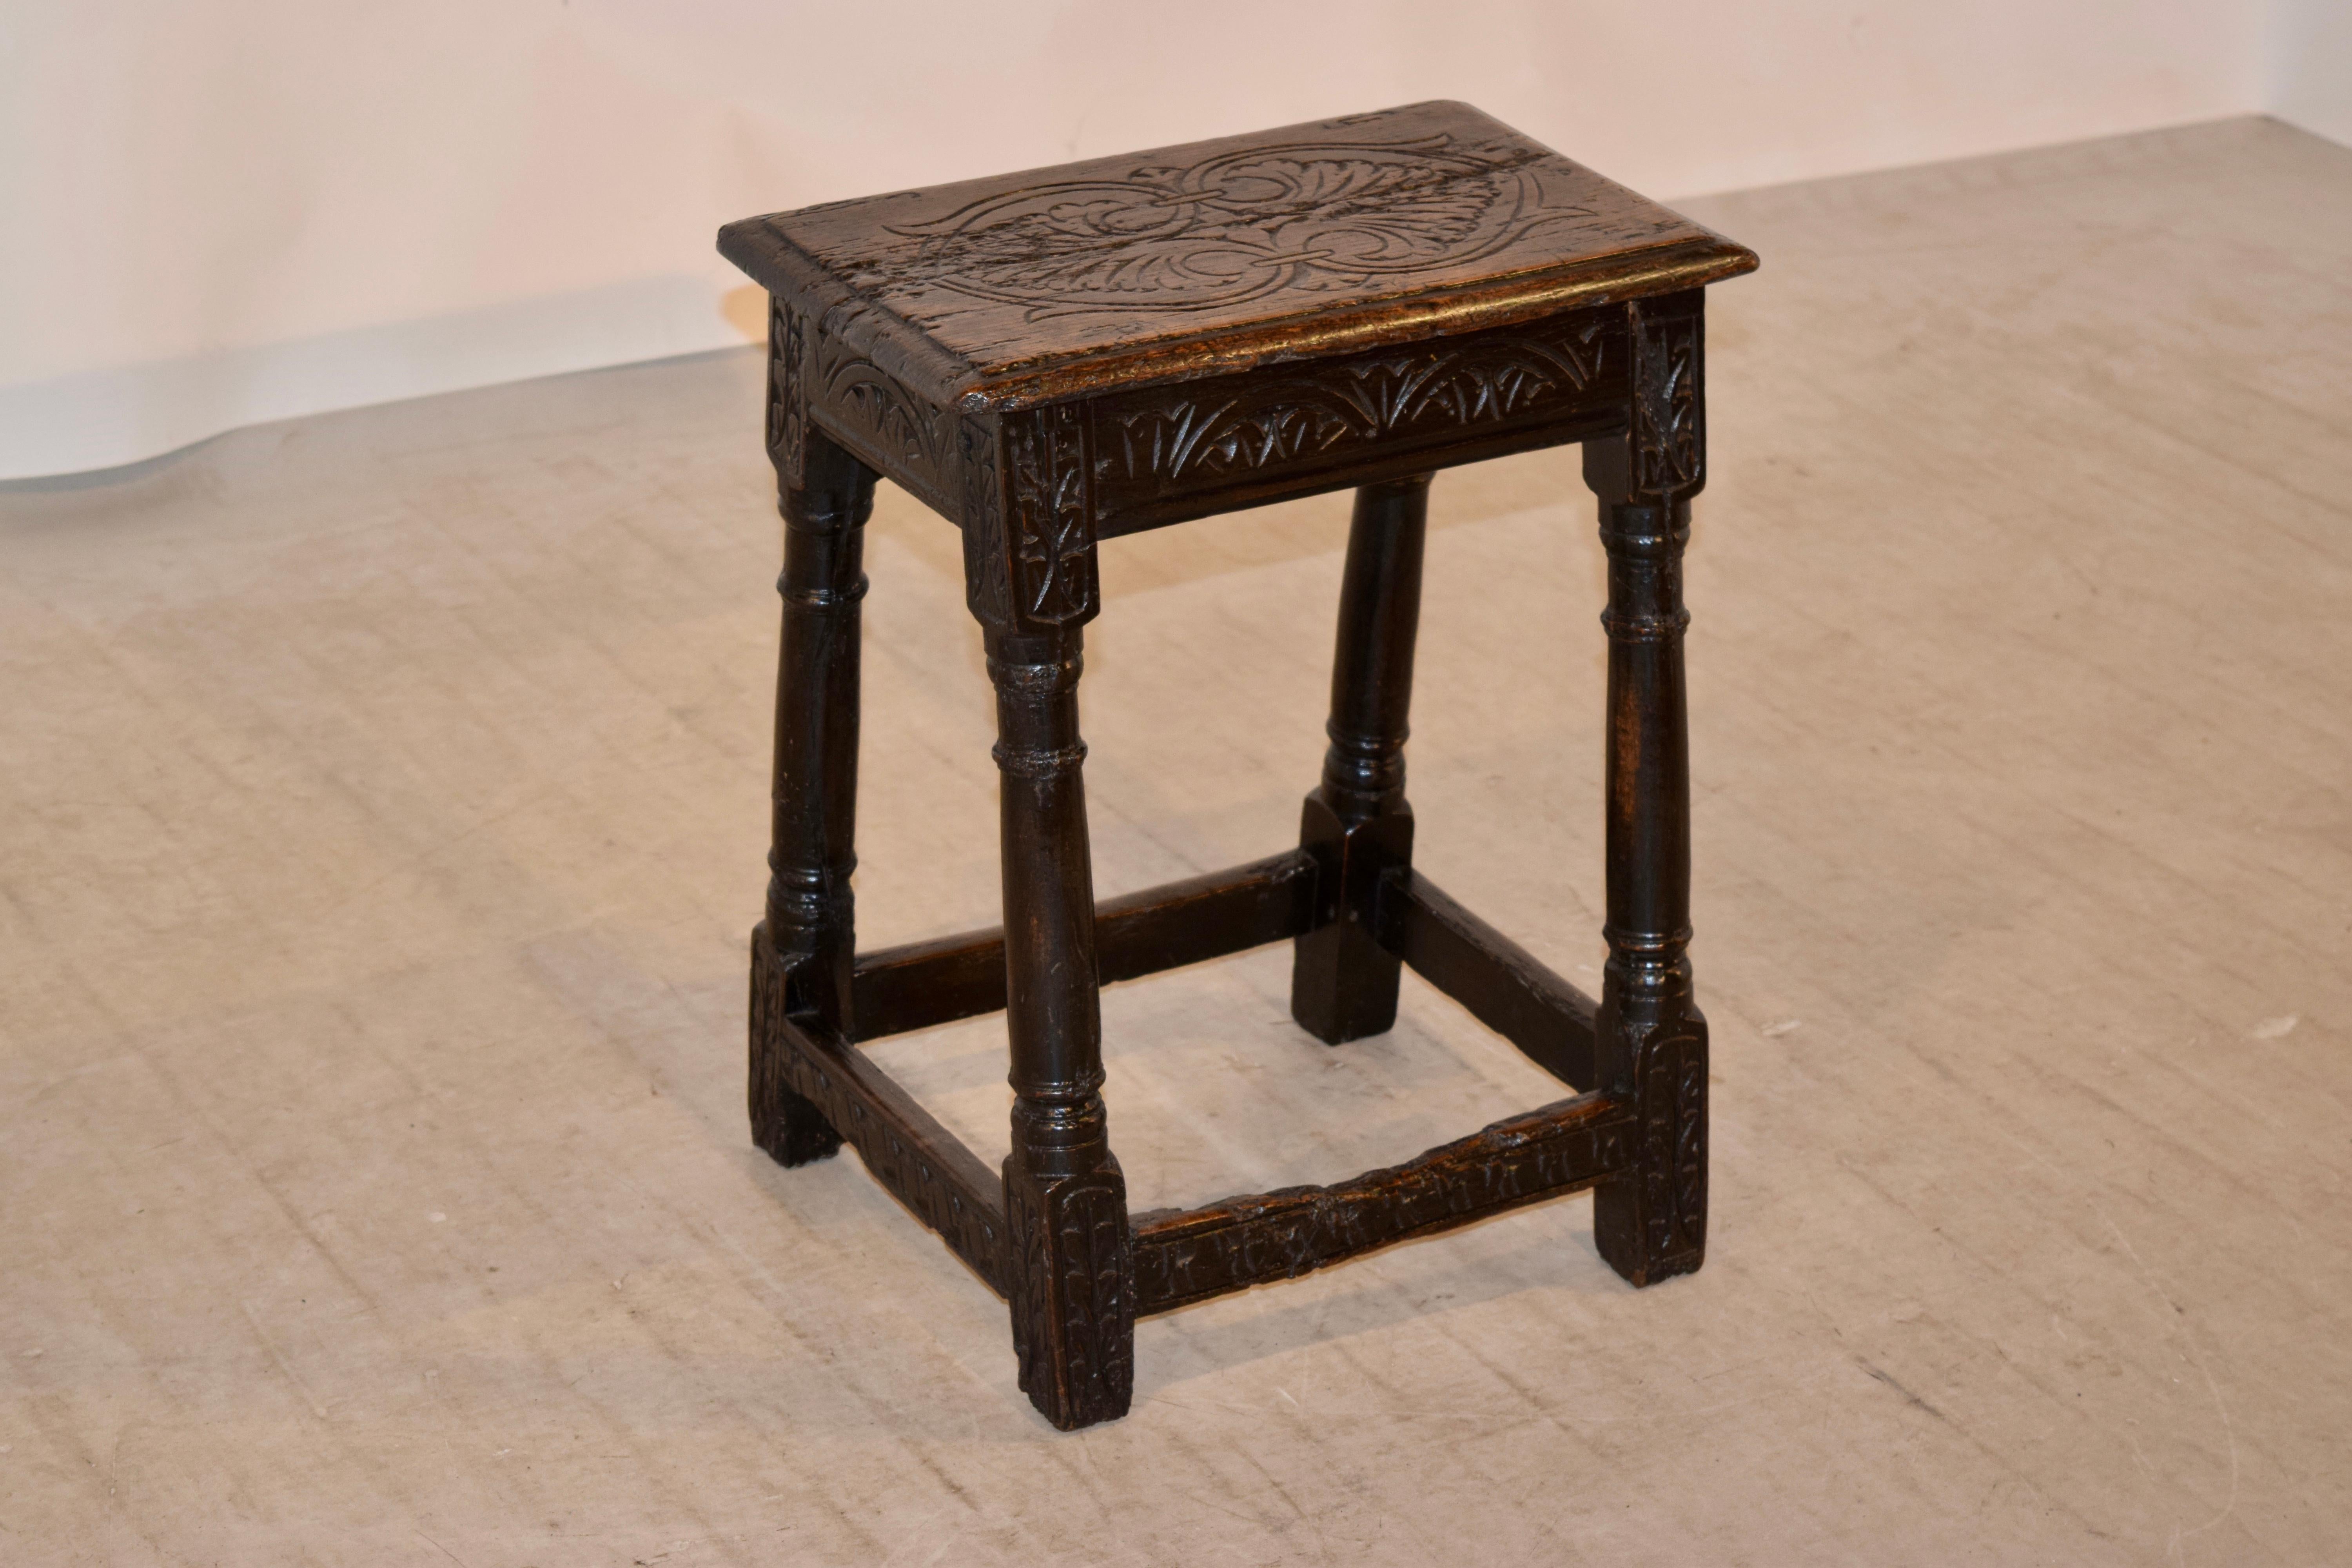 16th century English oak joint stool with plenty of wear and shrinkage throughout, which is just what you want to see in a stool of this age. The seat is decorated with hand carvings and has a bevelled edge following down to a simple apron, which is